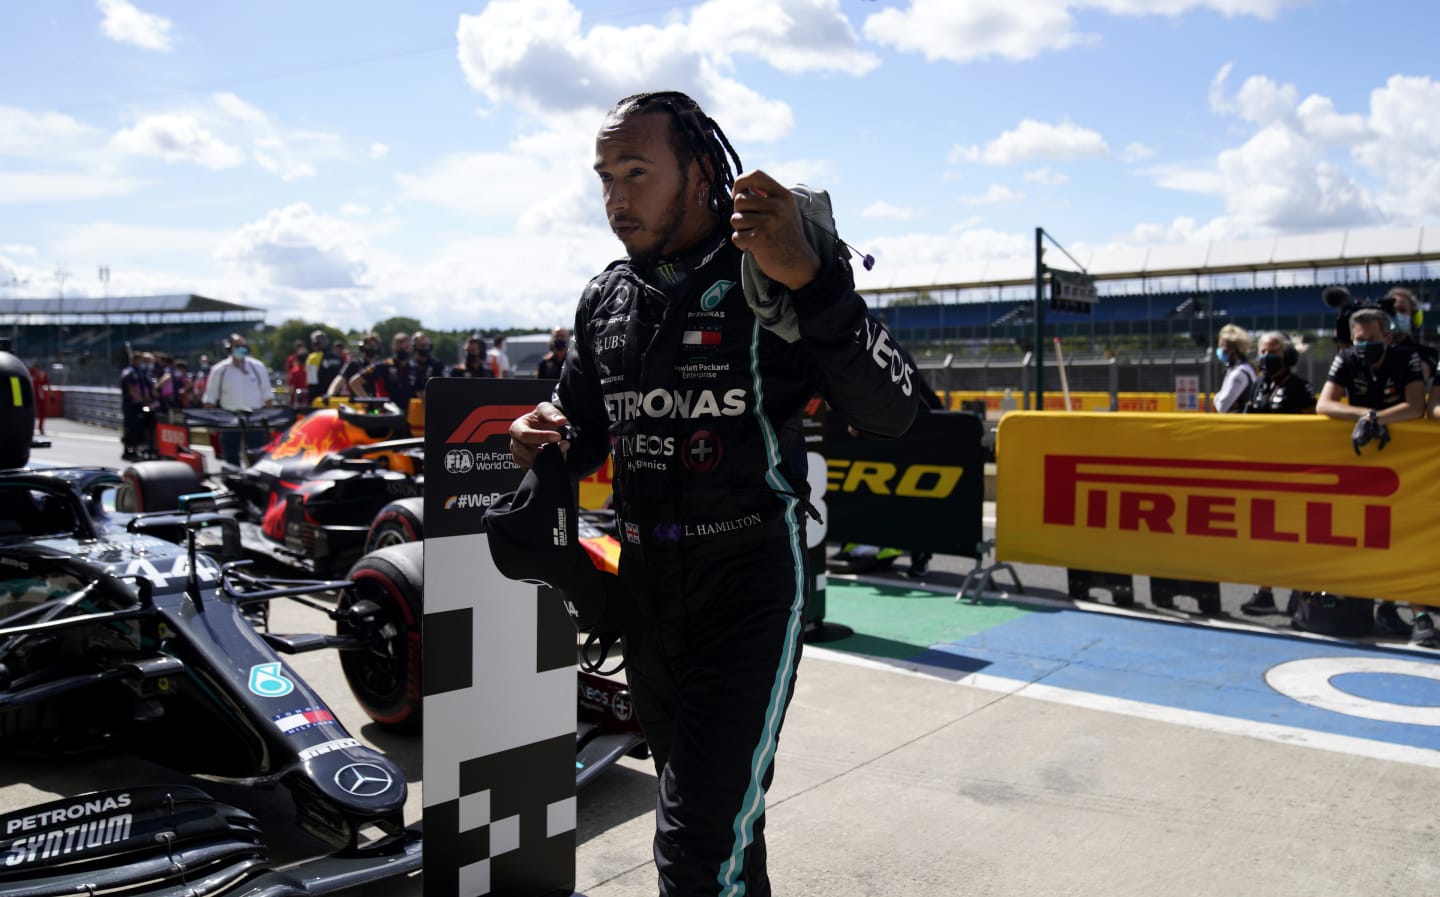 NORTHAMPTON, ENGLAND - AUGUST 01: Pole position qualifier Lewis Hamilton of Great Britain and